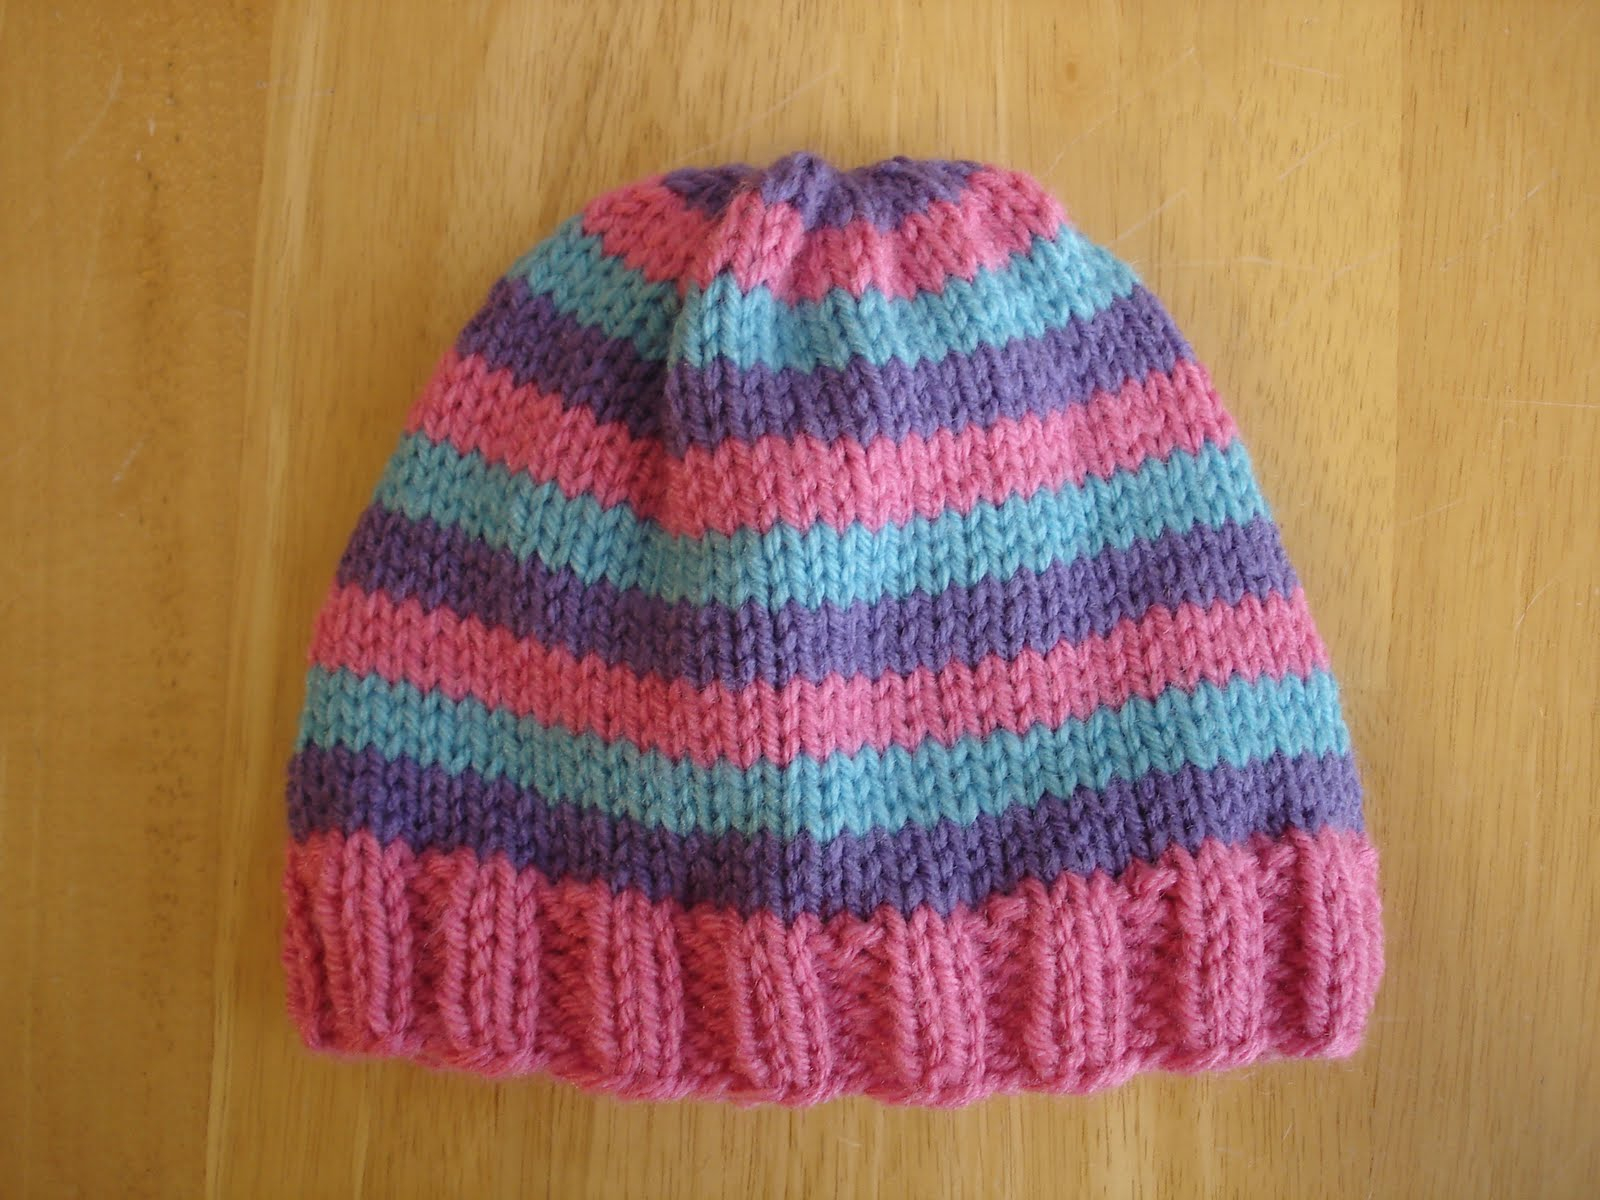 Child's Knitted Hat Pattern Clearance Childs Knitted Beanie Hat Pattern Crochet De83d Ae086